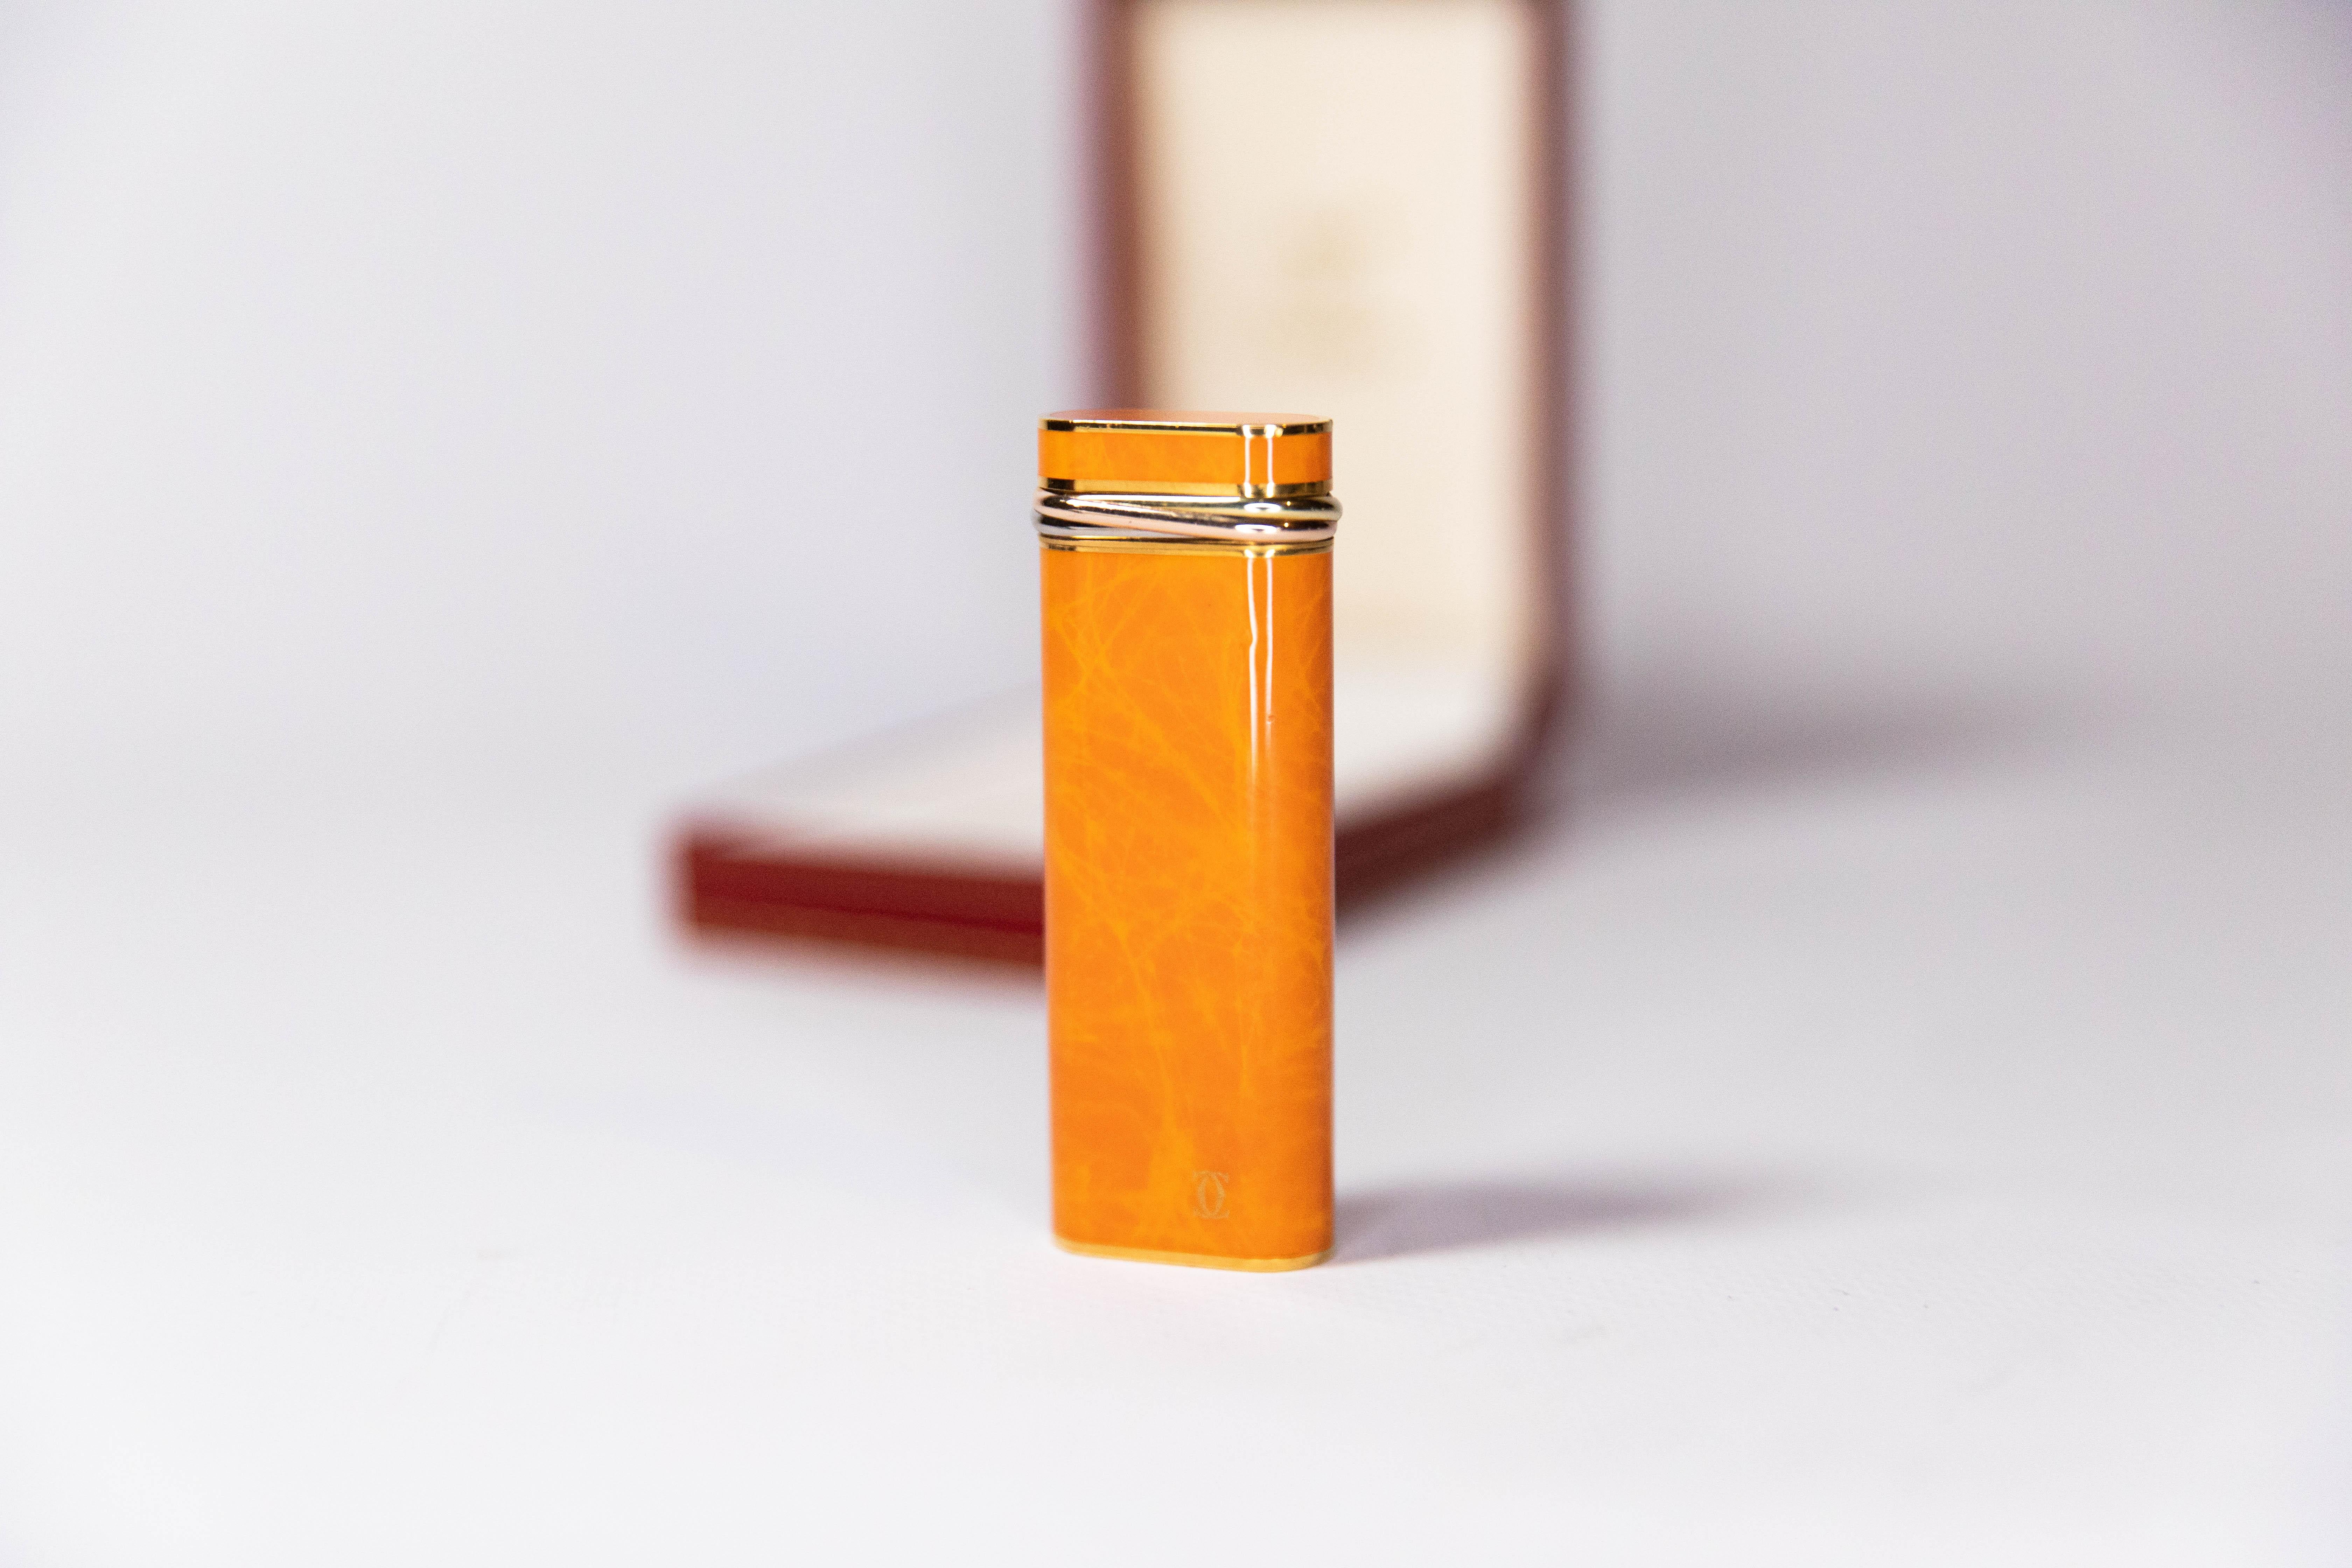 Vintage Orange Gold Plated Cartier Les Must Trinity lighter

This gold-plated Tortoiseshell lacquered Cartier Les must lighter is indeed eye candy. Fully functional, sparks excellent, and lights every time. The lighter is in absolutely magnificent